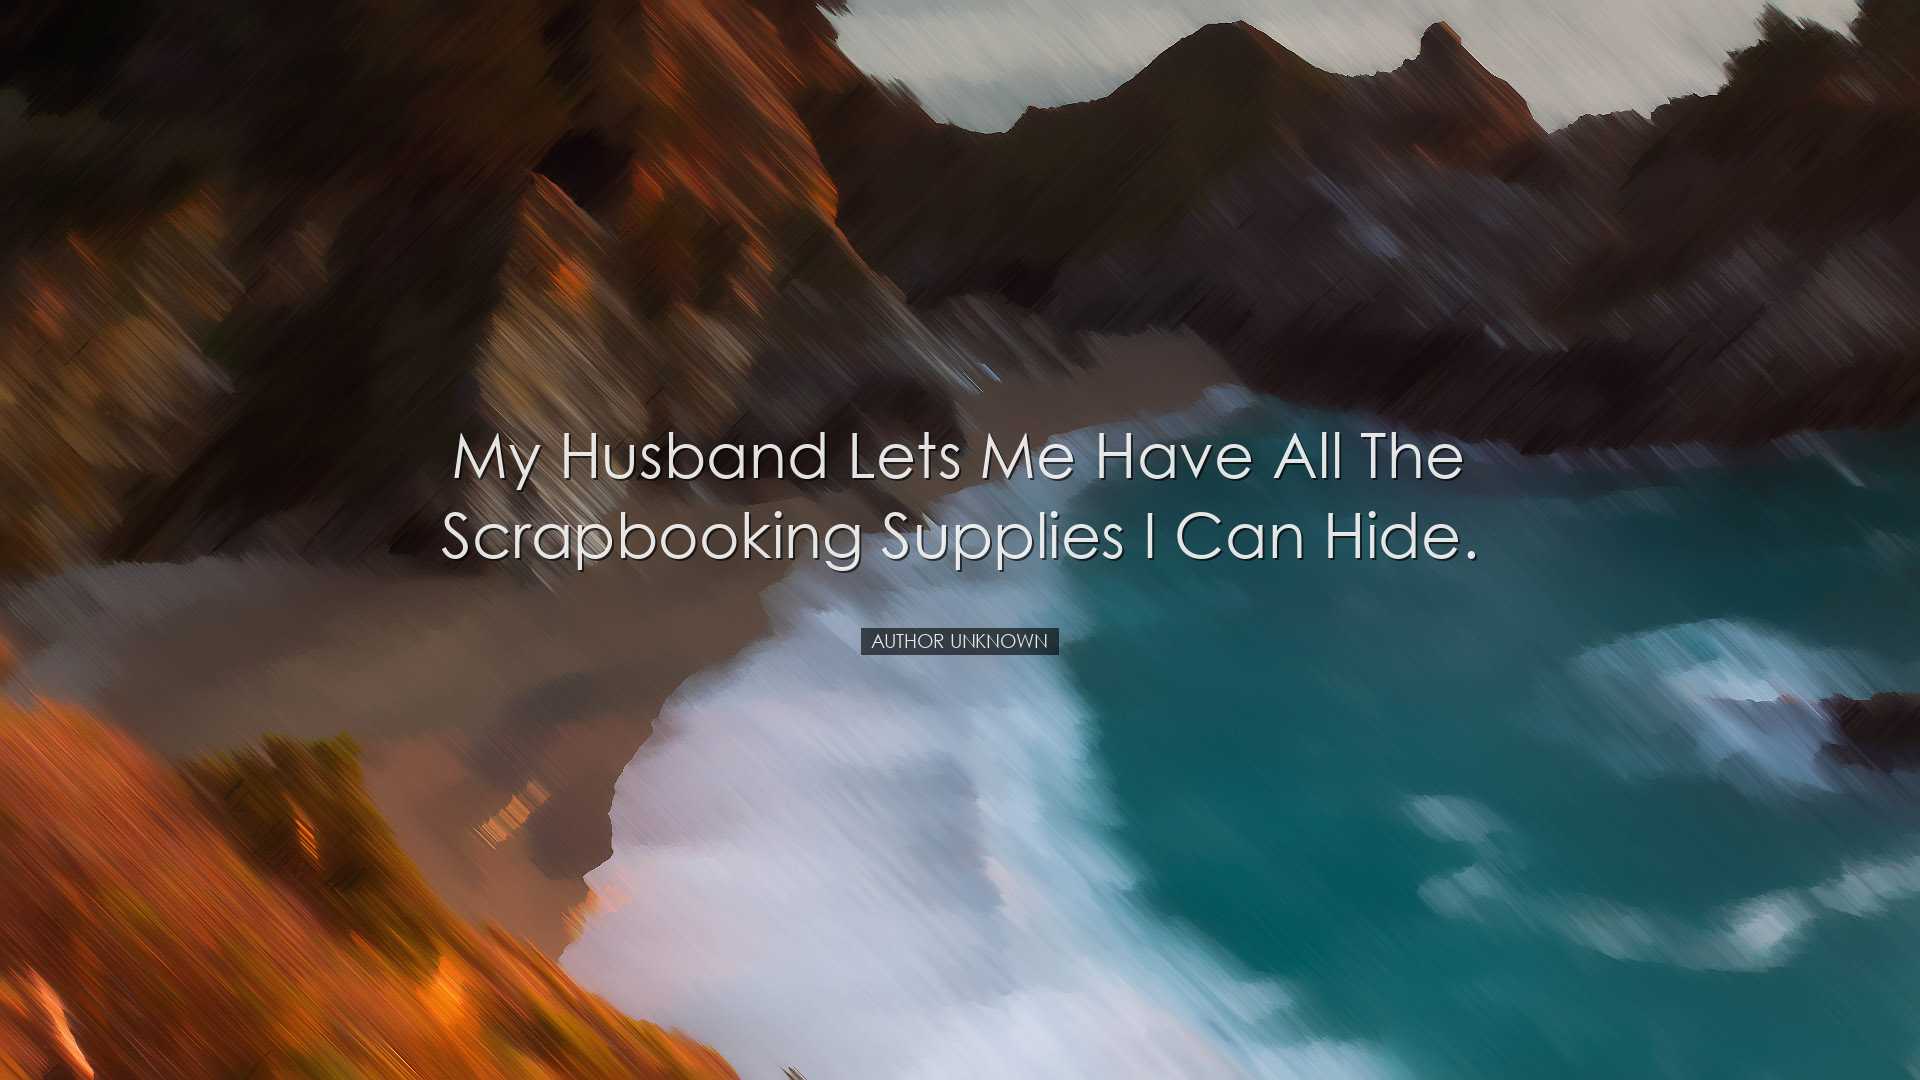 My husband lets me have all the scrapbooking supplies I can hide.